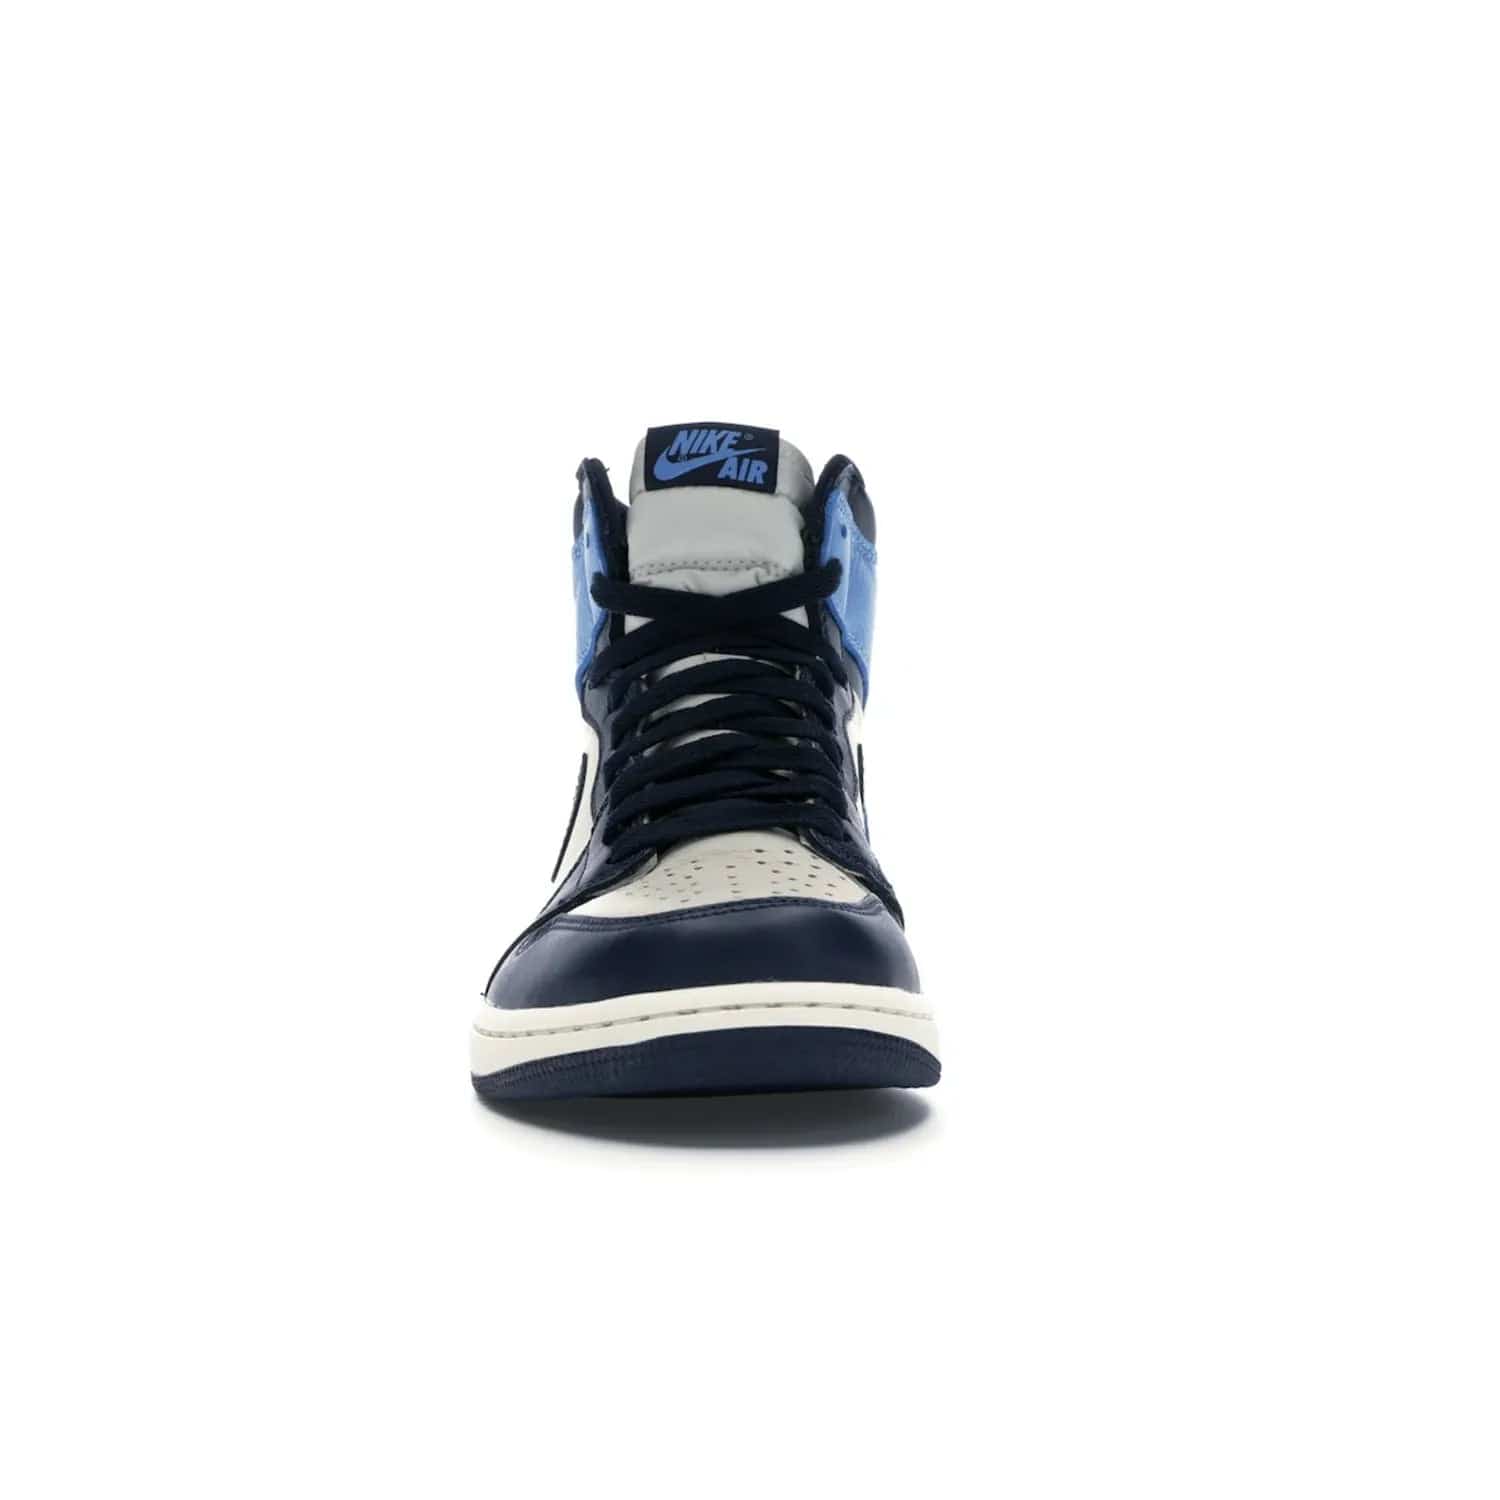 Jordan 1 Retro High Obsidian UNC - Image 10 - Only at www.BallersClubKickz.com - Bring a timeless classic to your wardrobe with the Air Jordan 1 Retro High "Obsidian/University Blue”. A full leather upper combines Obsidian and University Blue detailing for a retro Jordan style. Stitched Jumpman logo pays tribute to UNC. Experience classic style with a timeless sneaker.